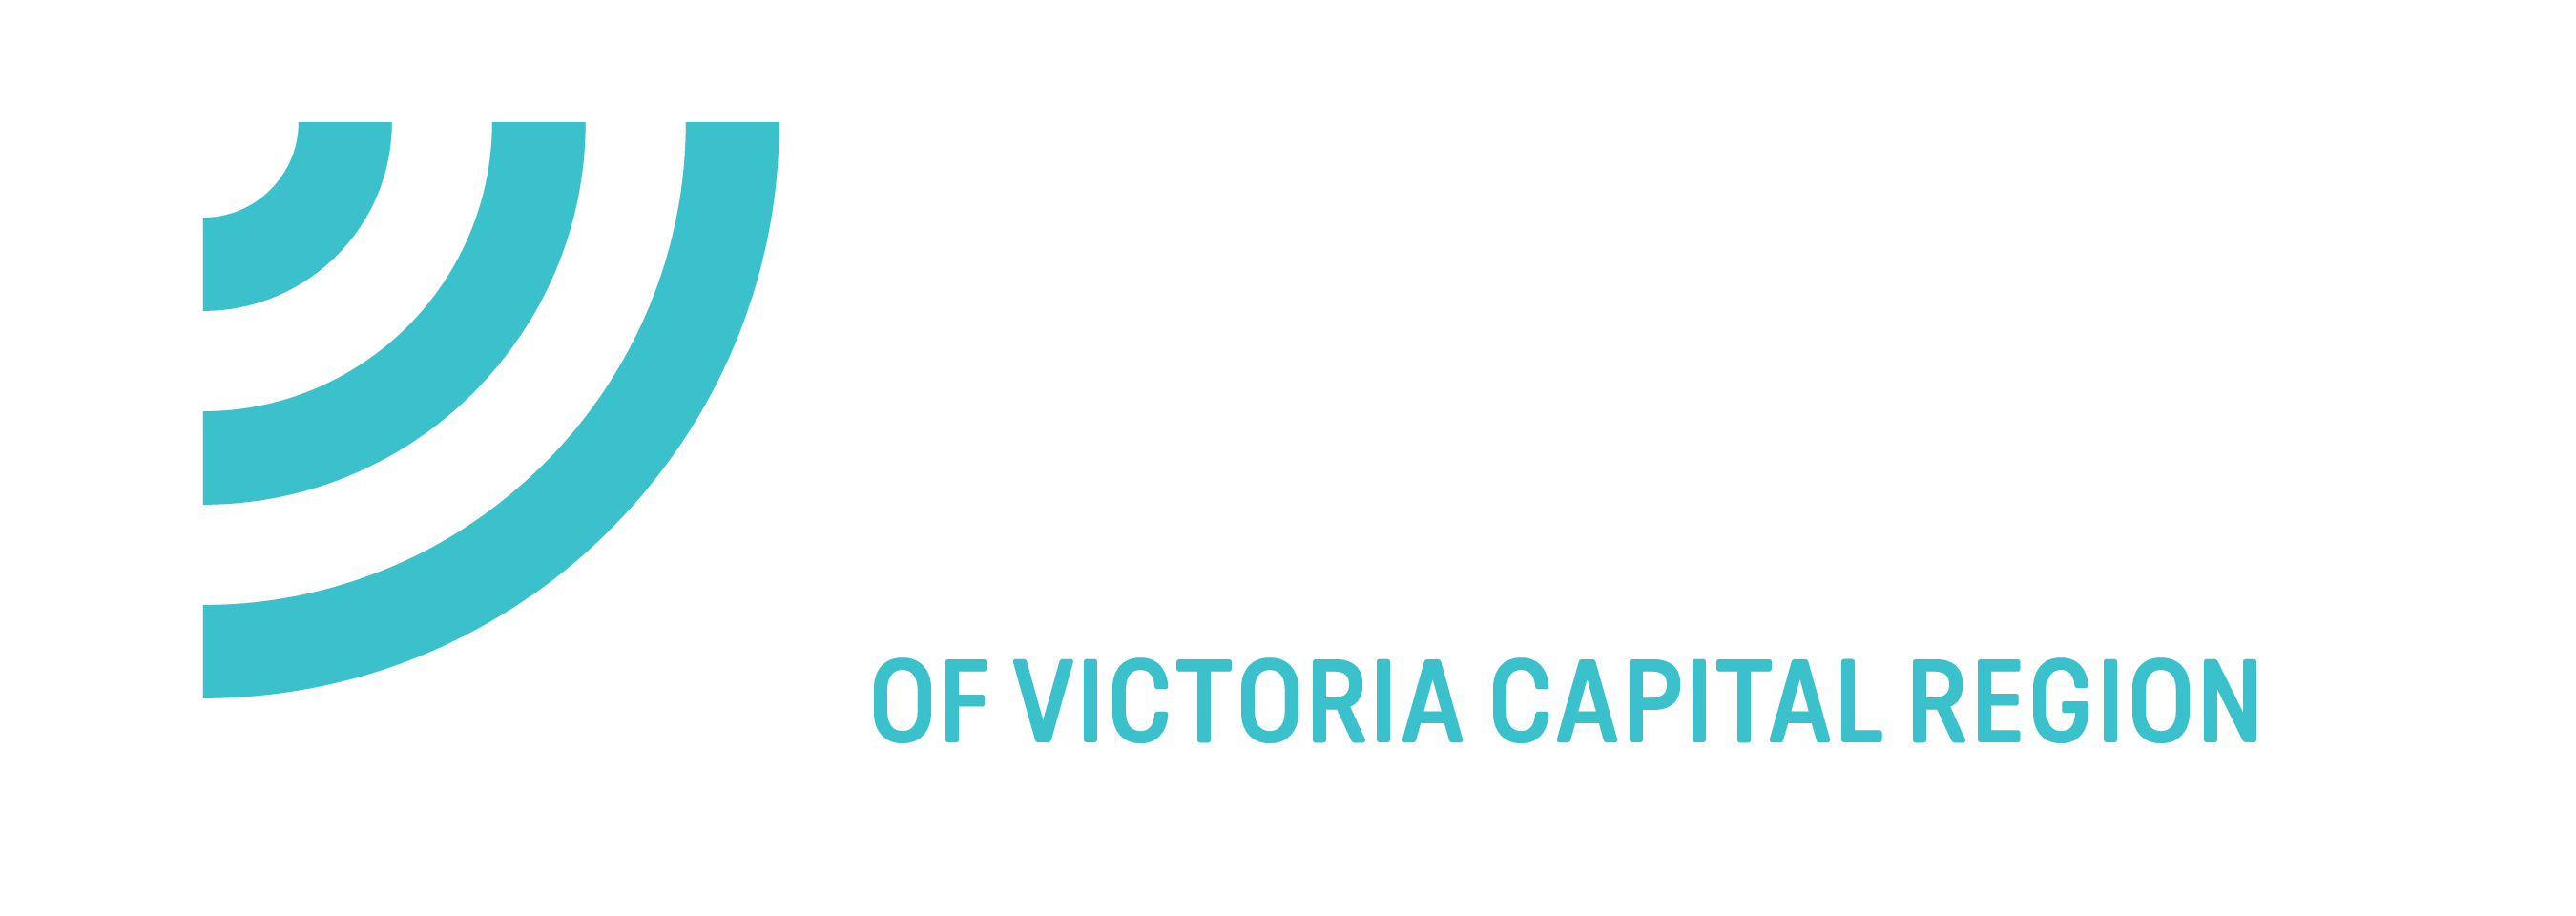 Mentor Annual Review Survey - Big Brothers Big Sisters of Victoria Capital Region